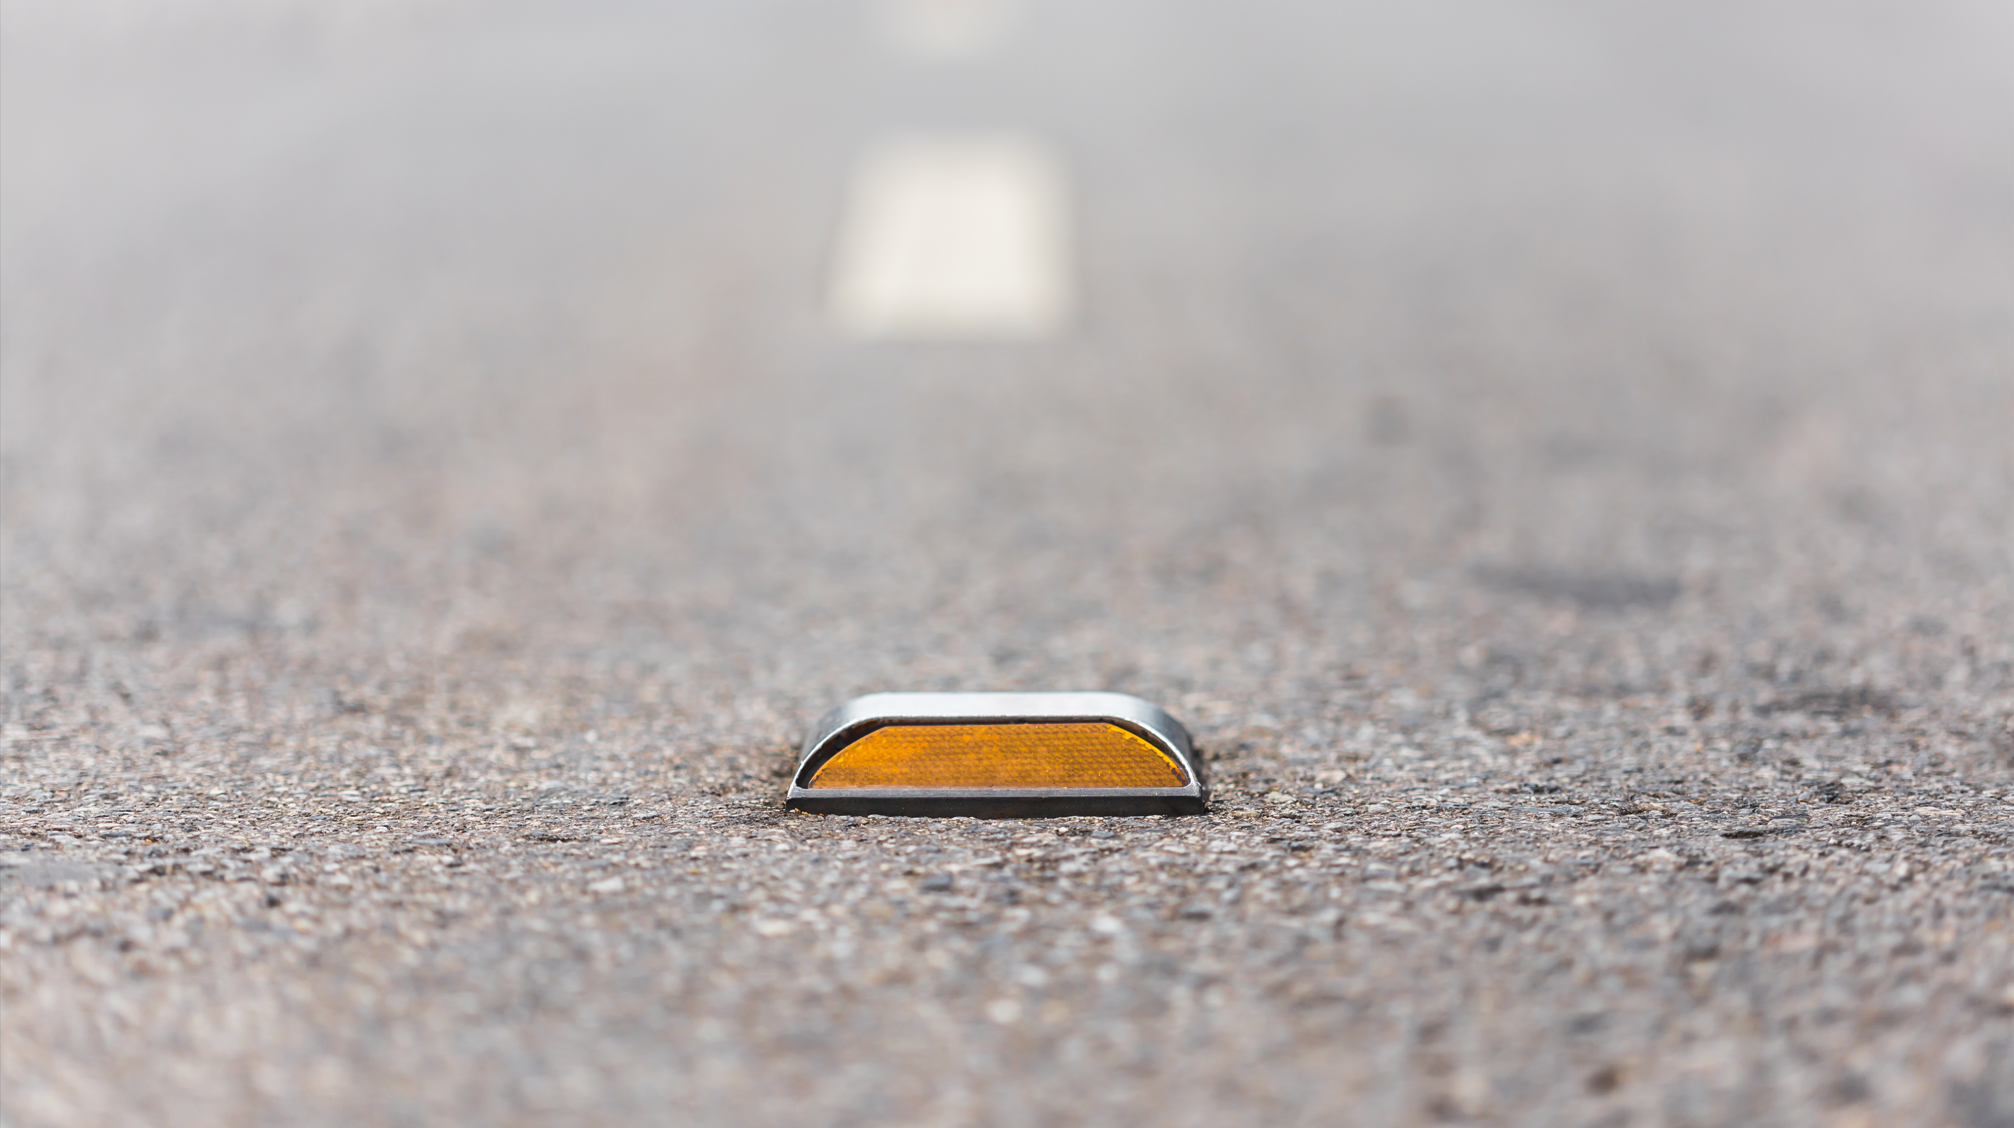 Retroreflectors are commonly used in transportation applications, such as “cat’s eye” markers on roads